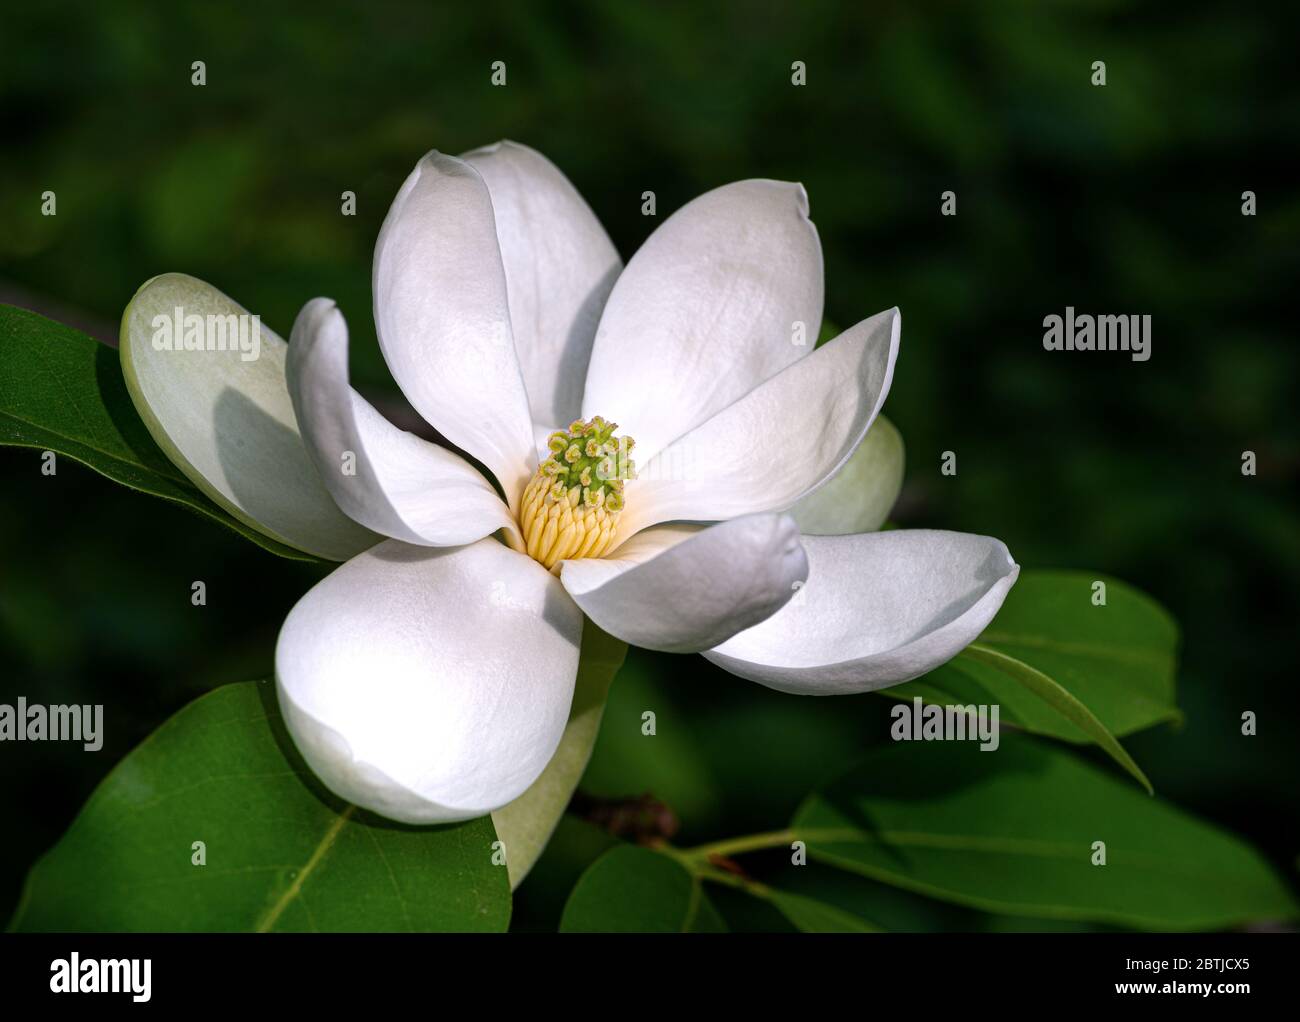 Flower of sweetbay magnolia  (Magnolia virginiana), a small tree native to the Atlantic and Gulf coasts of the United States. Stock Photo